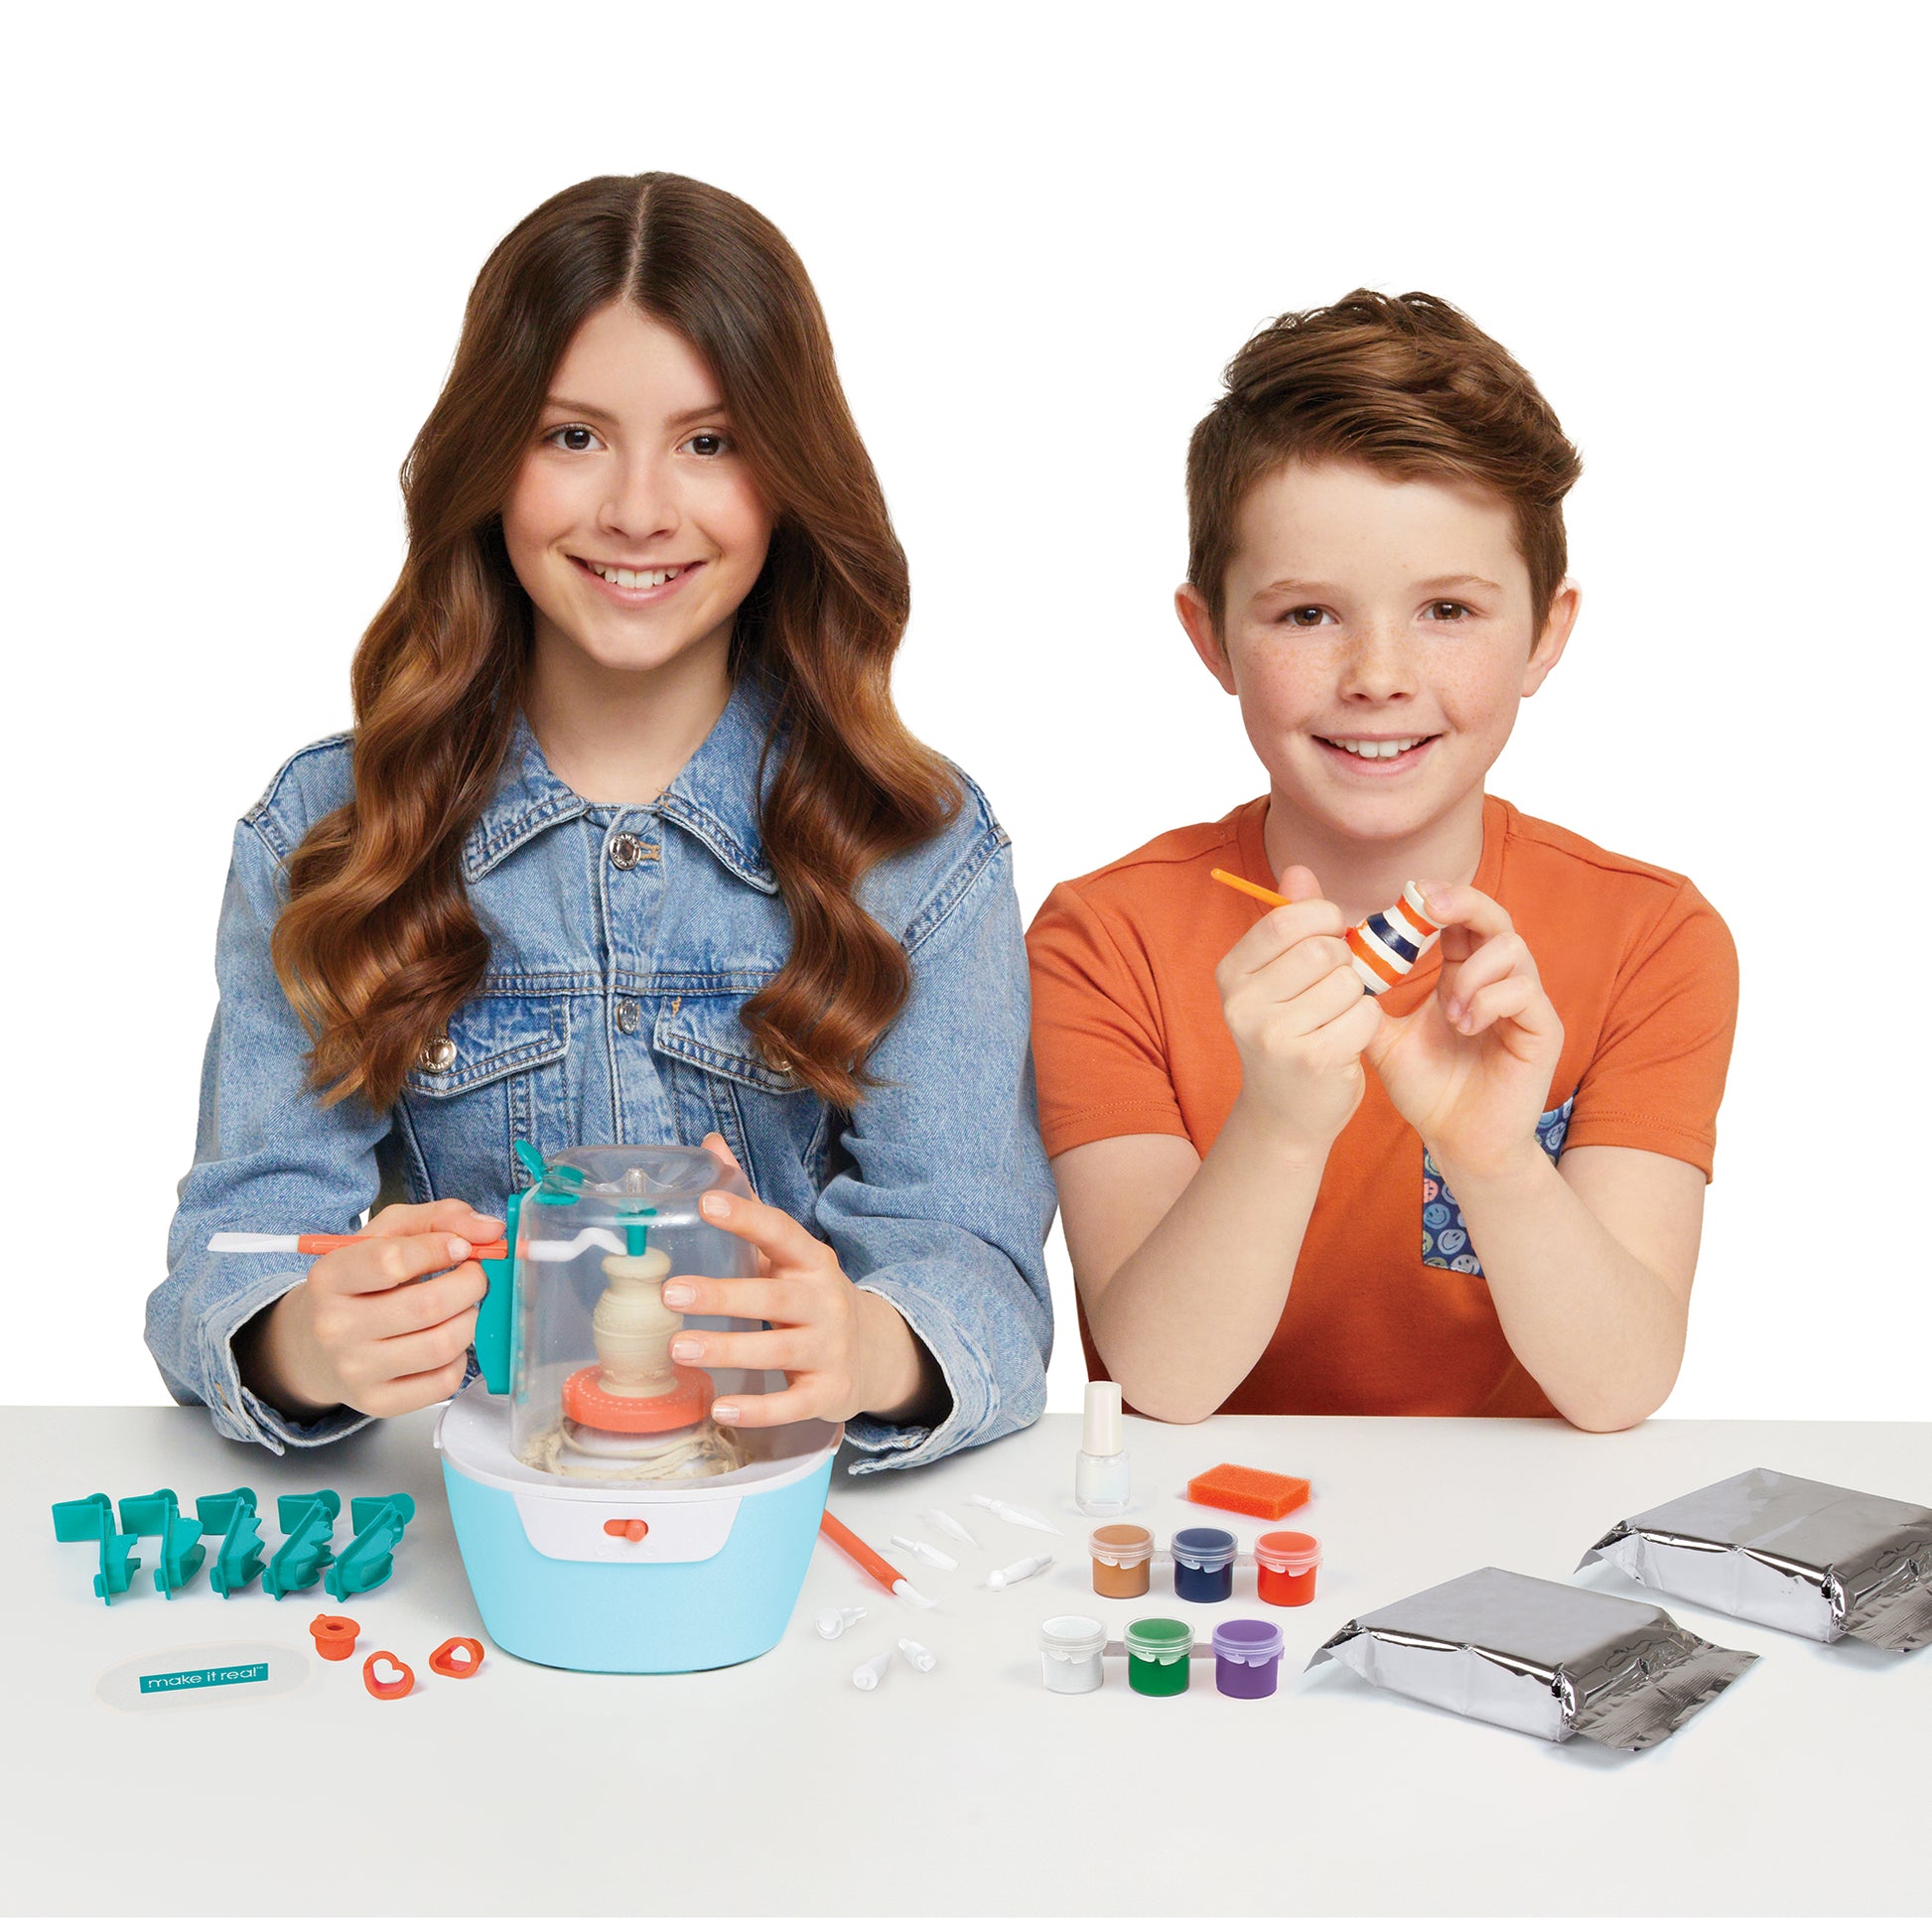  Make It Real: Mini Pottery Studio - 26 pcs DIY Pottery Kit,  Mess Free Air Dry Clay, 10 Projects, Tweens, Girls & Kids Ages 8+ : Arts,  Crafts & Sewing